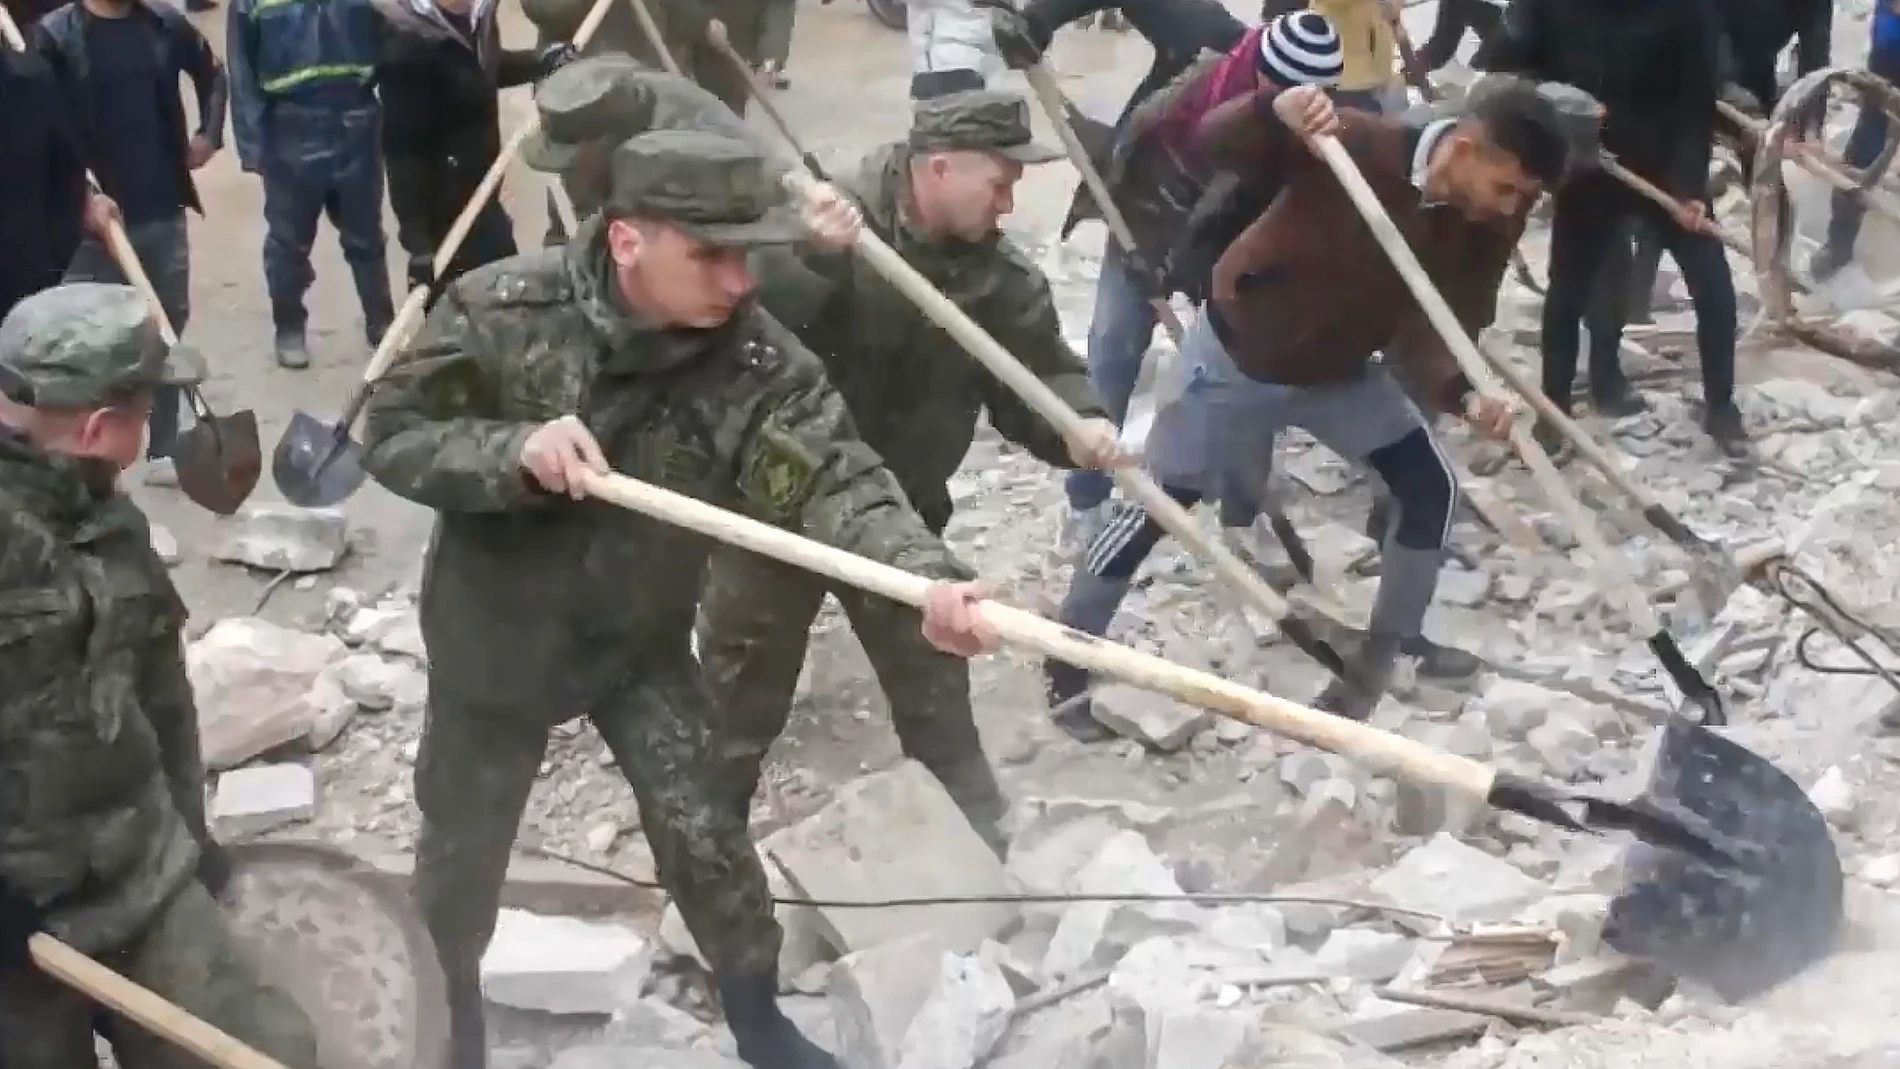 Latakia (Syrian Arab Republic), 07/02/2023.- A still image taken from a handout video provided by the Russian Defence Ministry Press-Service on 07 February 2023 shows Russian servicemen searching for victims at the site of a collapsed building after a major earthquake in Latakia, Syria. More than 4,000 people were killed and thousands more injured after a major 7.8 magnitude earthquake struck southern Turkey and northern Syria on 06 February. Authorities fear the death toll will keep climbing as rescuers look for survivors across the region. (Terremoto/sismo, Rusia, Siria, Turquía, Estados Unidos) EFE/EPA/RUSSIAN DEFENCE MINISTRY PRESS SERVICE HANDOUT -- BEST QUALITY AVAILABLE -- MANDATORY CREDIT -- HANDOUT EDITORIAL USE ONLY/NO SALES 